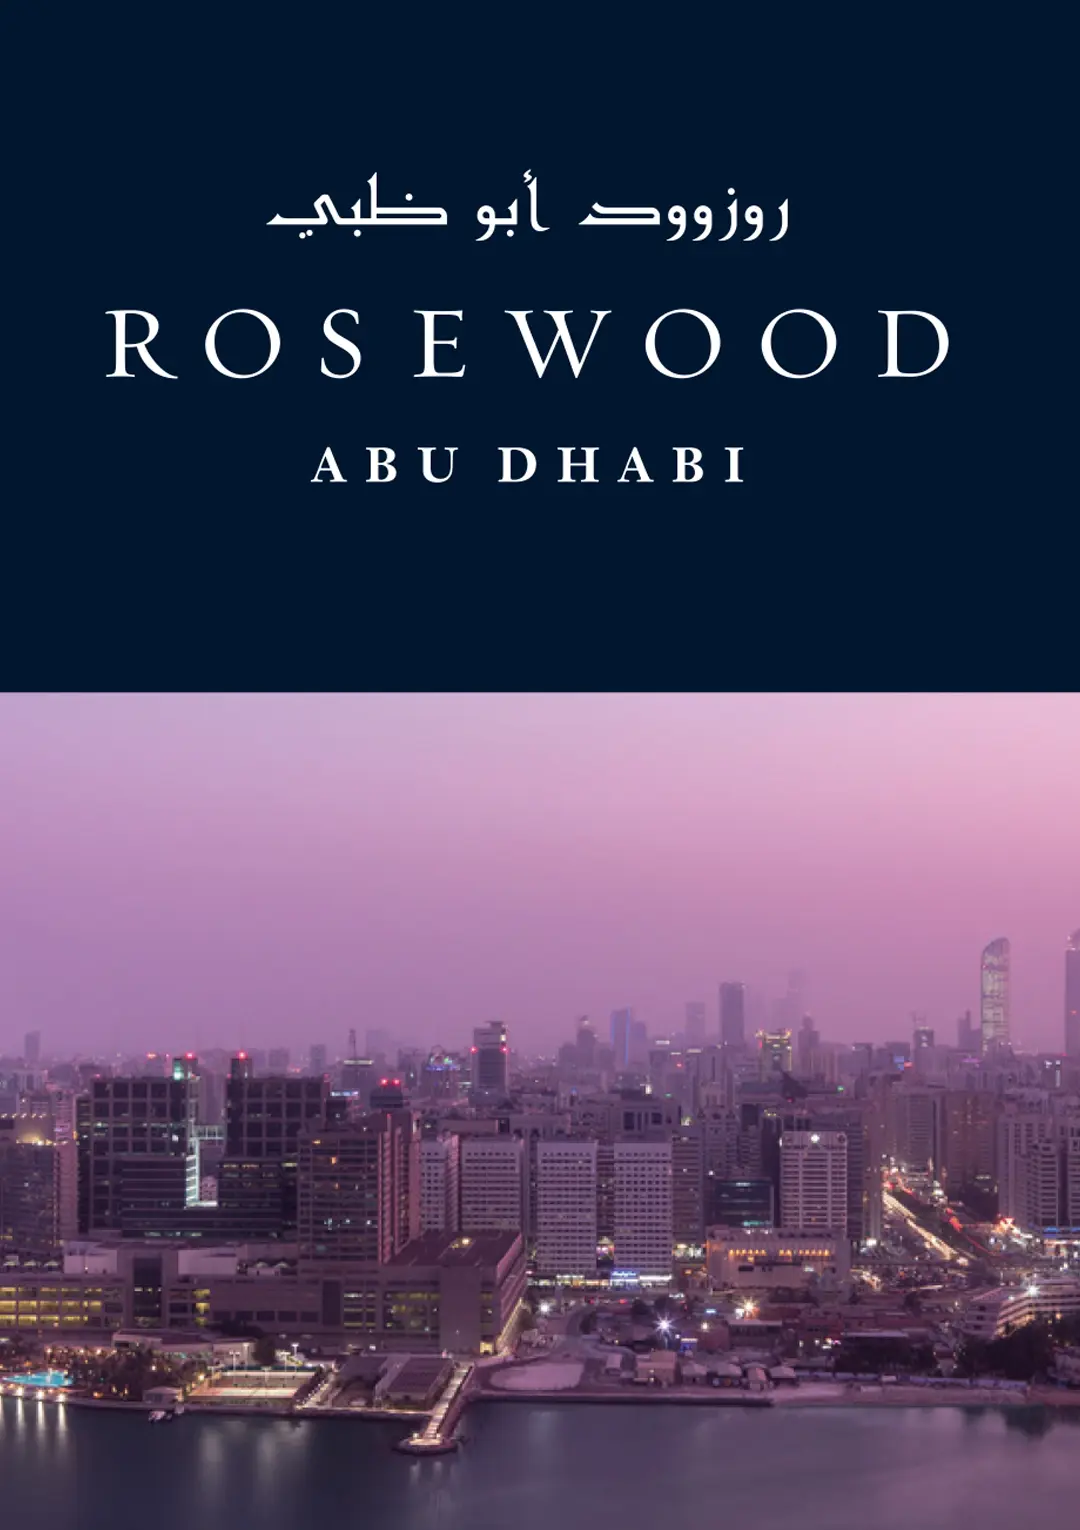 Rosewood Abu Dhabi Marketing Collaterals